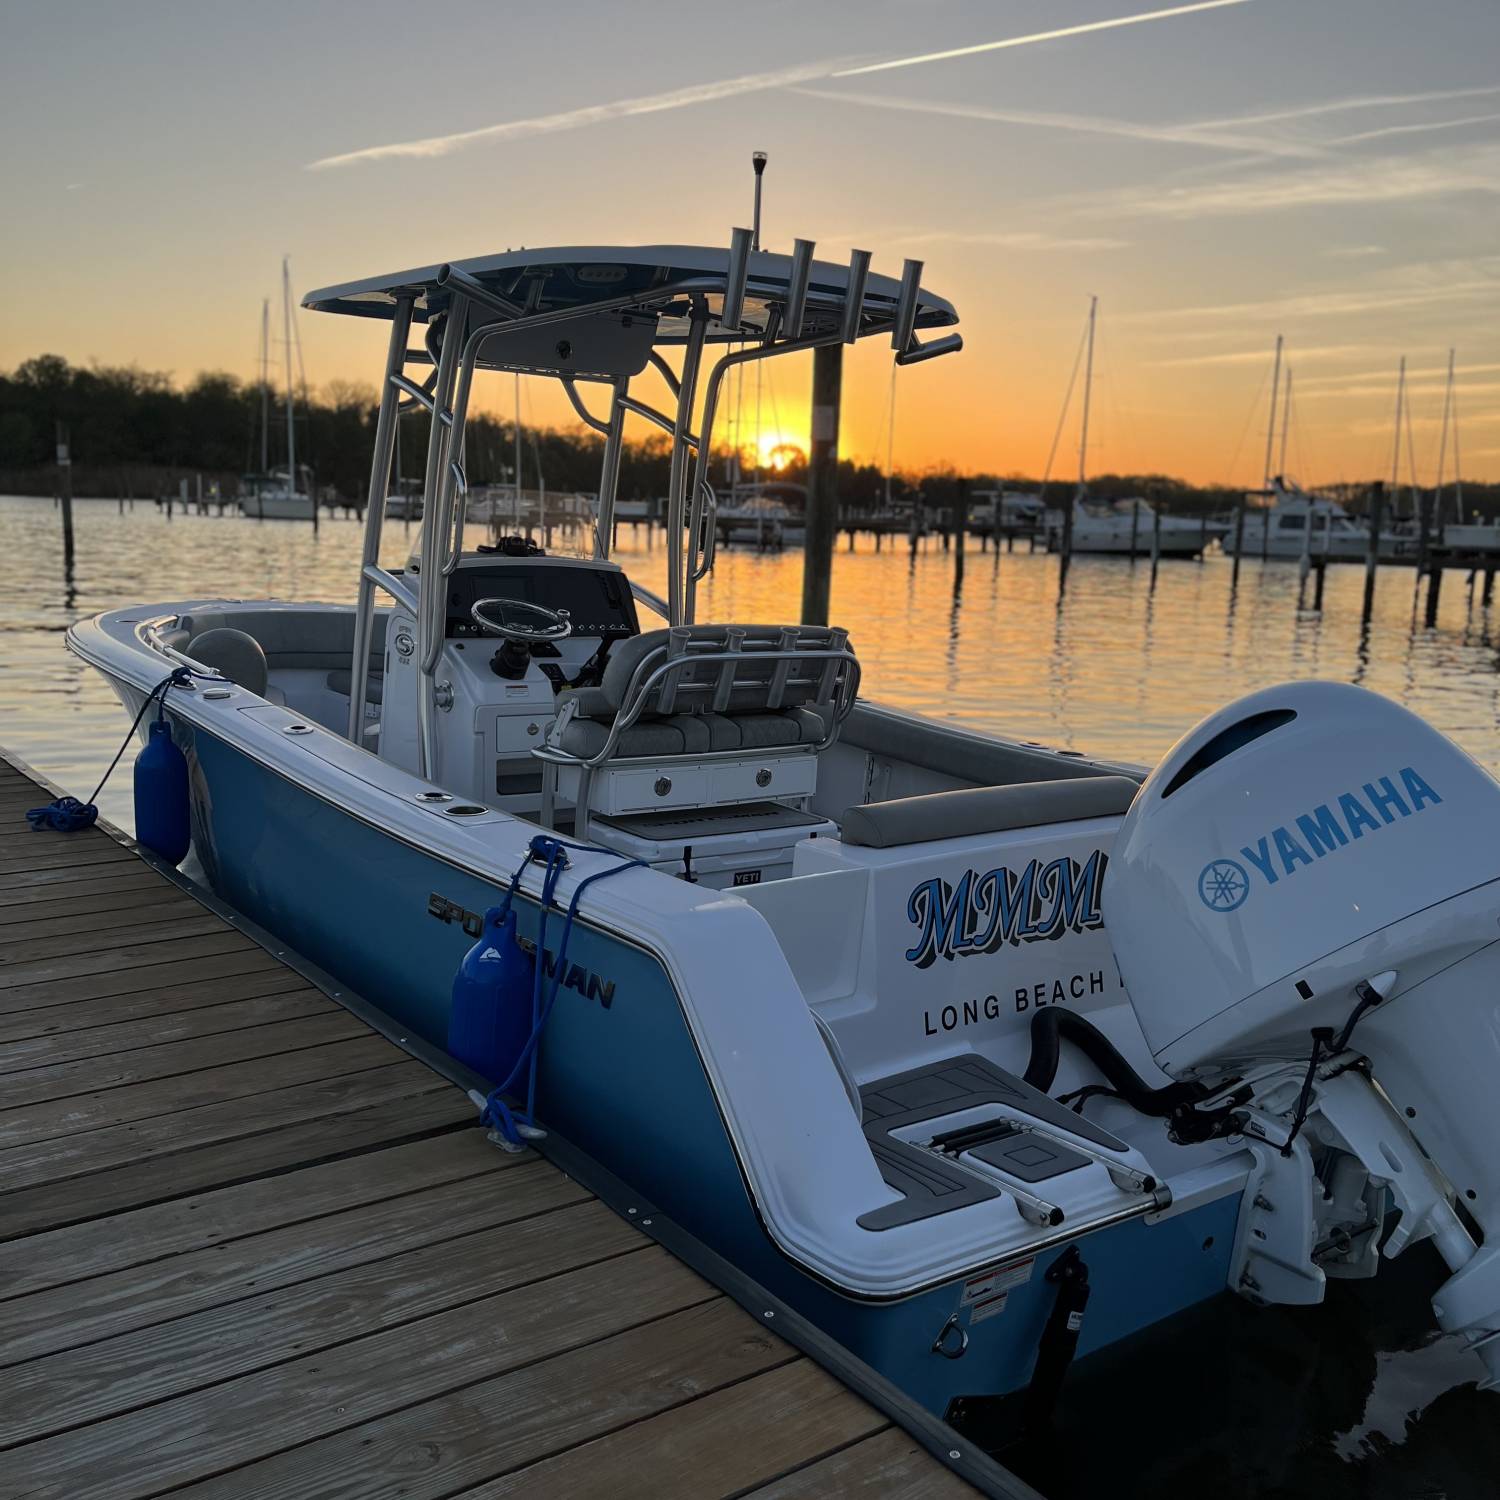 Title: Sunset Sportsman - On board their Sportsman Open 232 Center Console - Location: Bowleys Quarters, Maryland. Participating in the Photo Contest #SportsmanMay2024